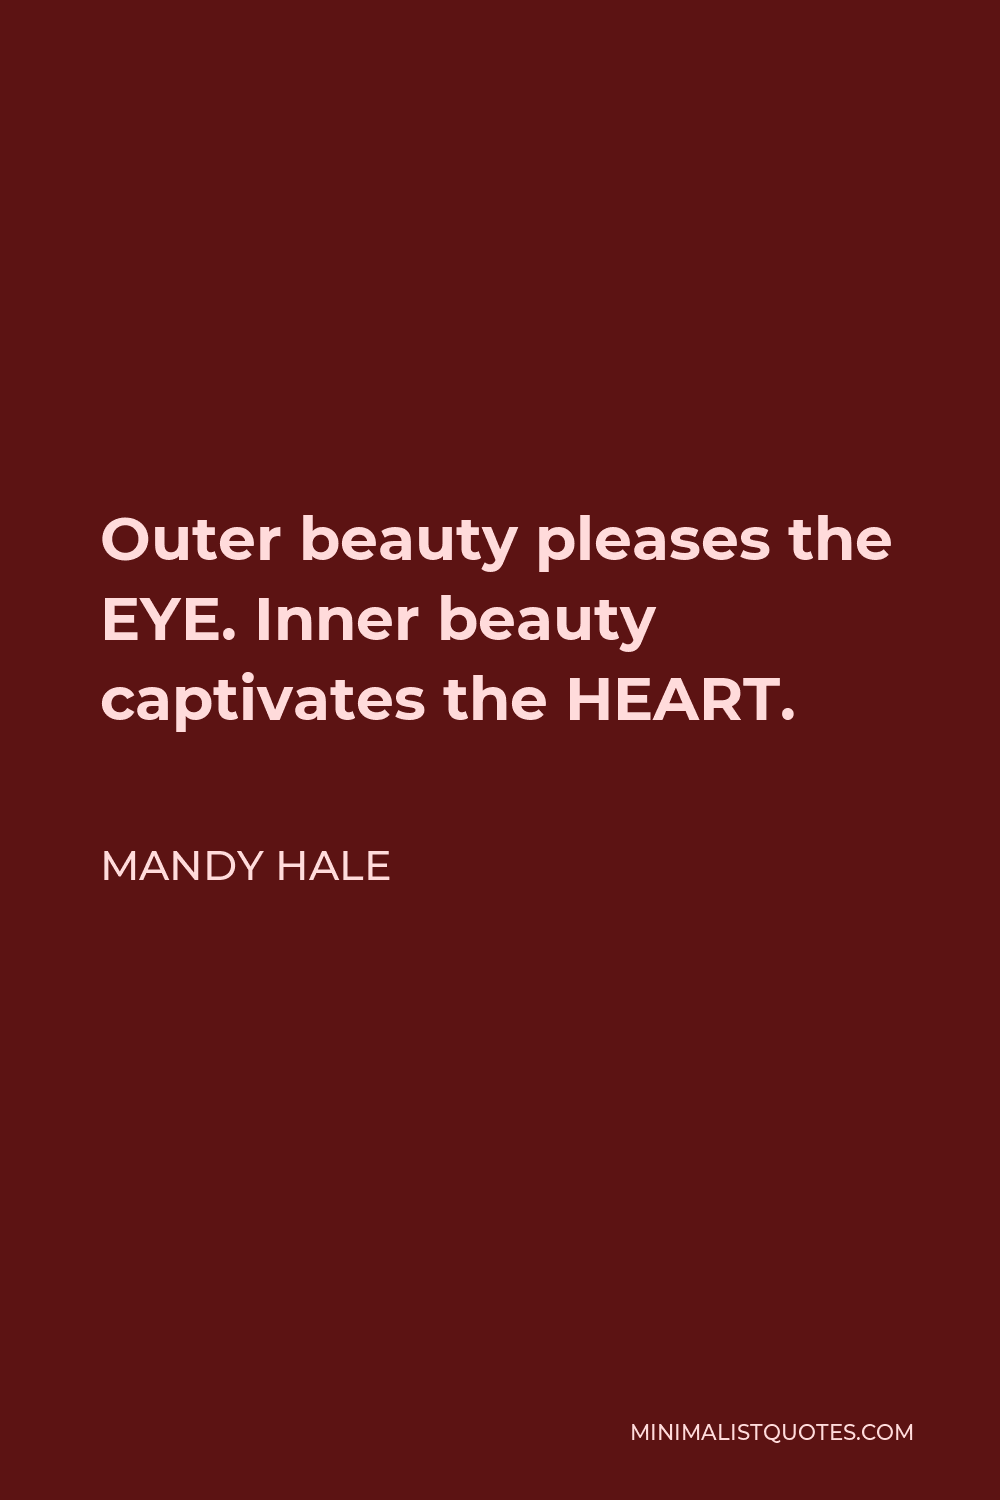 Mandy Hale Quote - Outer beauty pleases the EYE. Inner beauty captivates the HEART.